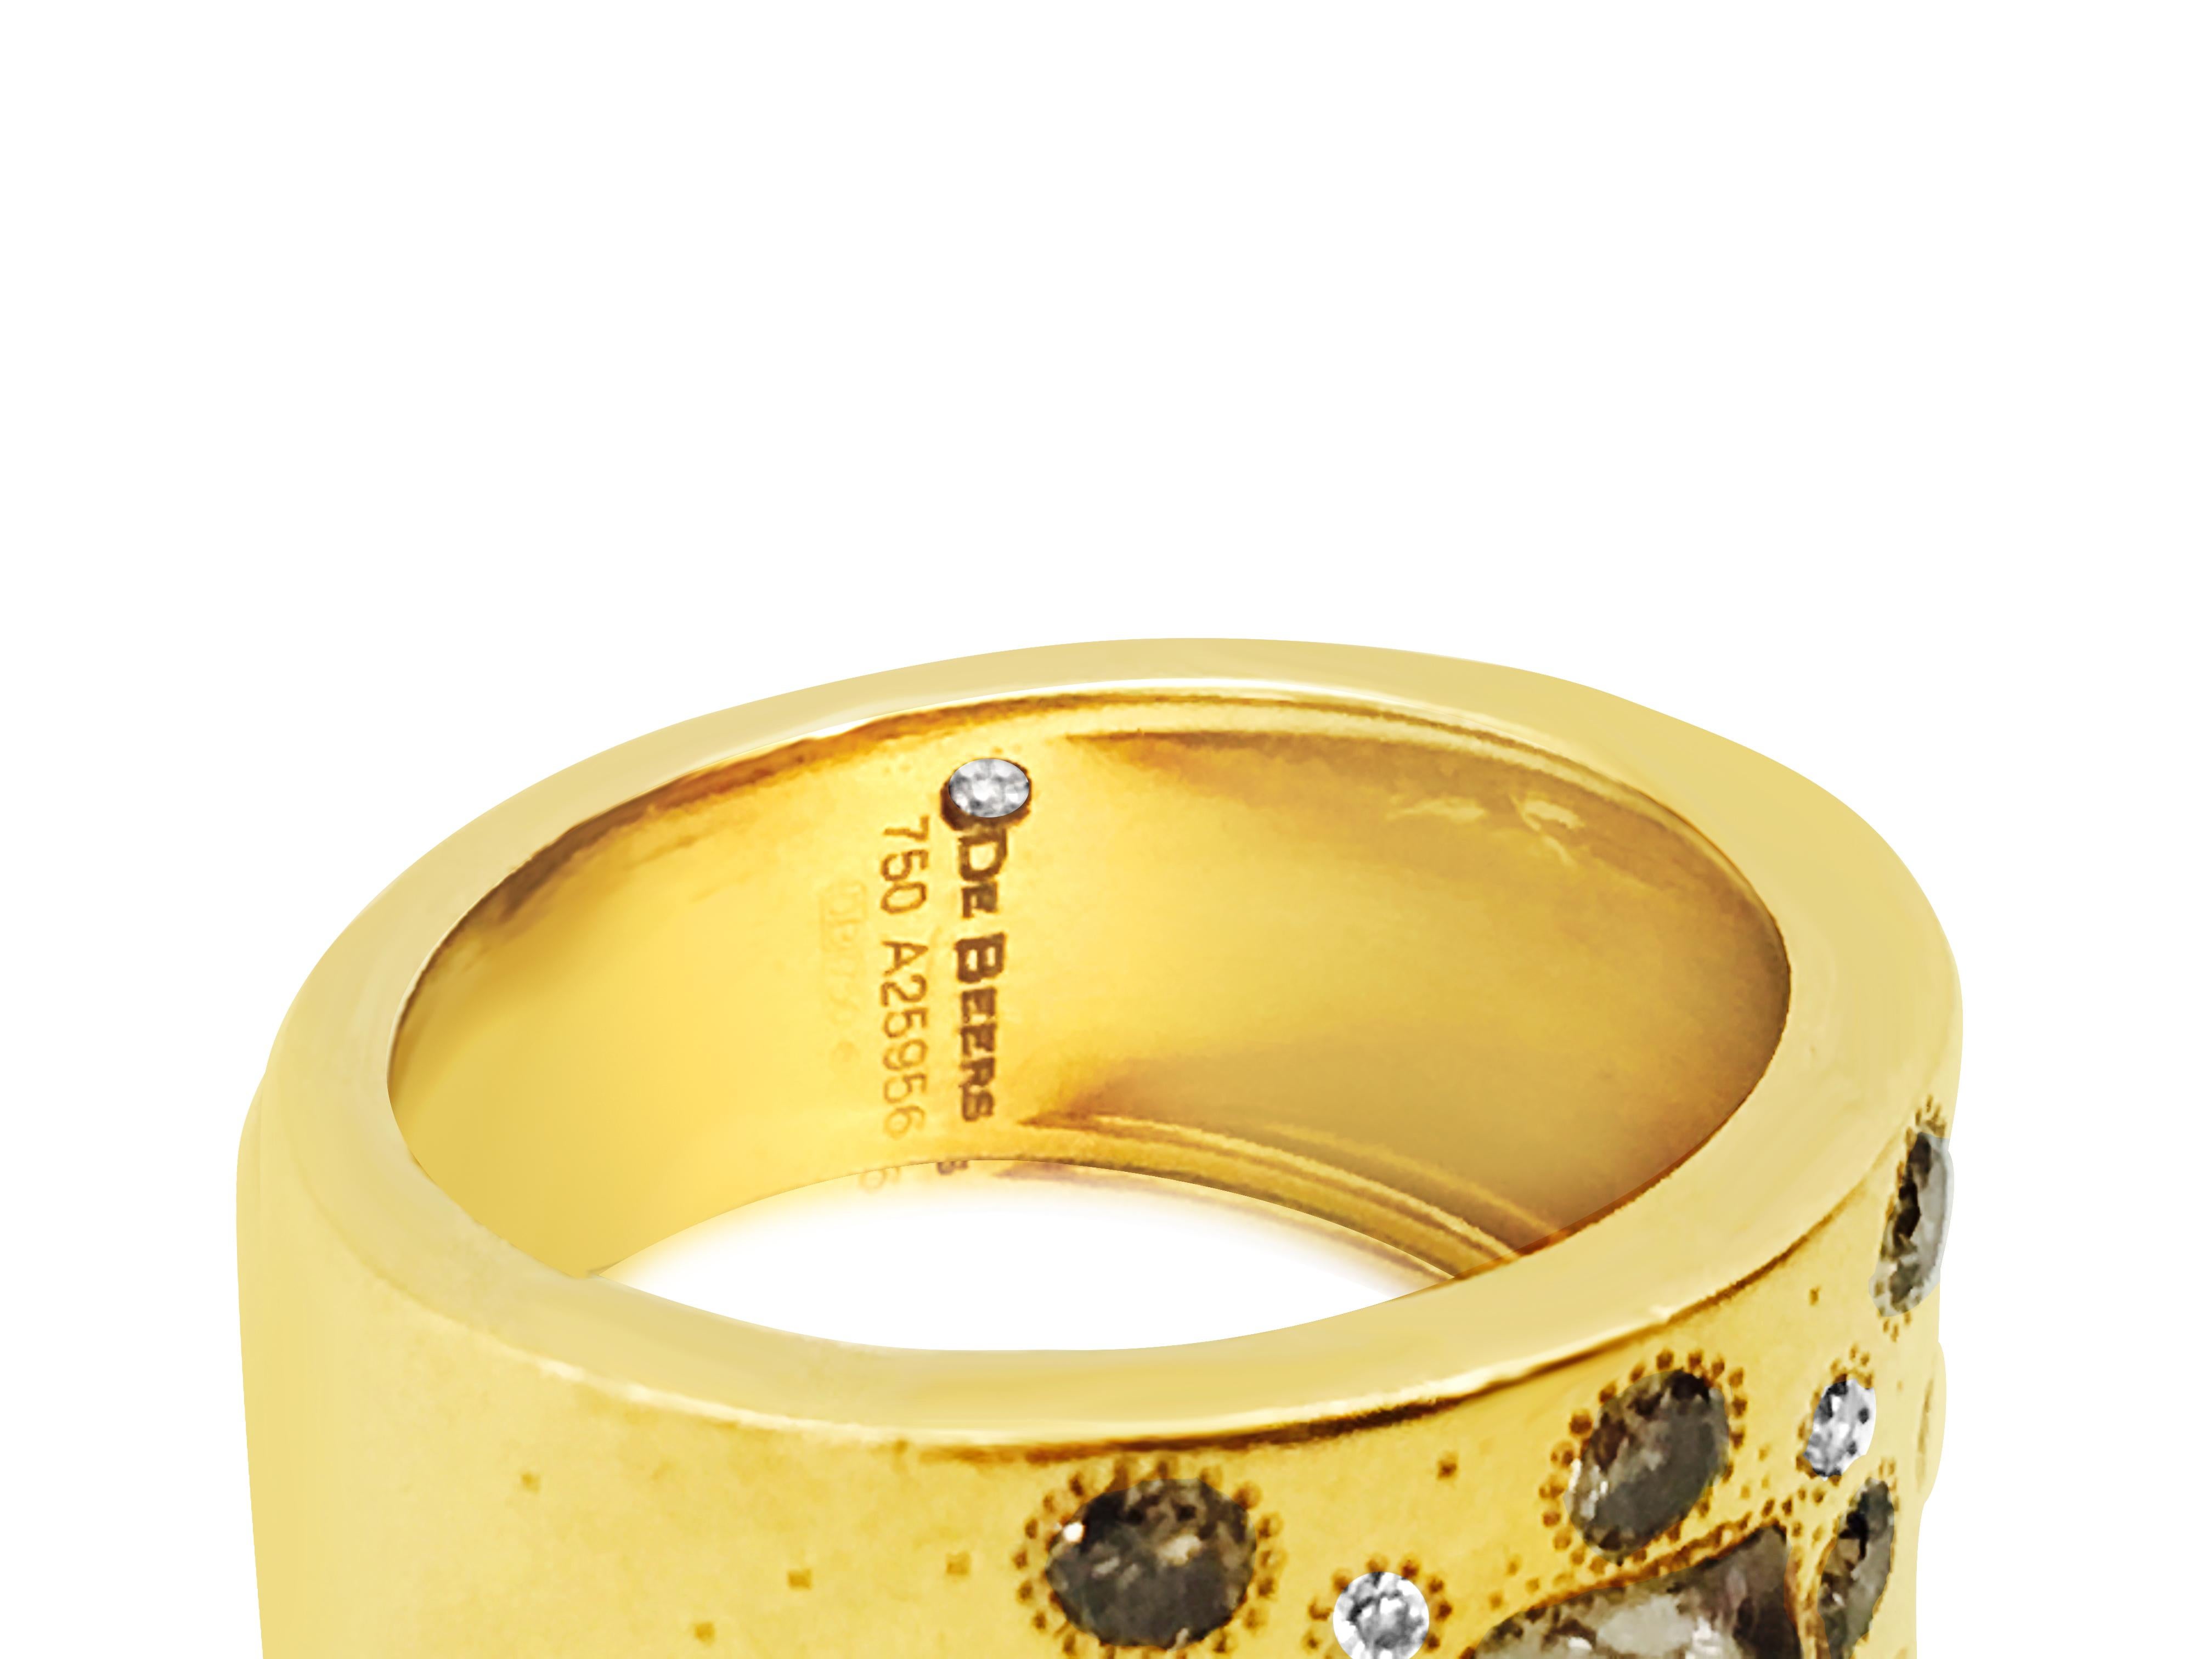 Forged from 18K yellow gold, this De Beers talisman collection ring boasts a rough diamond center accompanied by round brilliant cut side diamonds and fancy color diamonds, all sourced from natural earth mines. With its signature design and